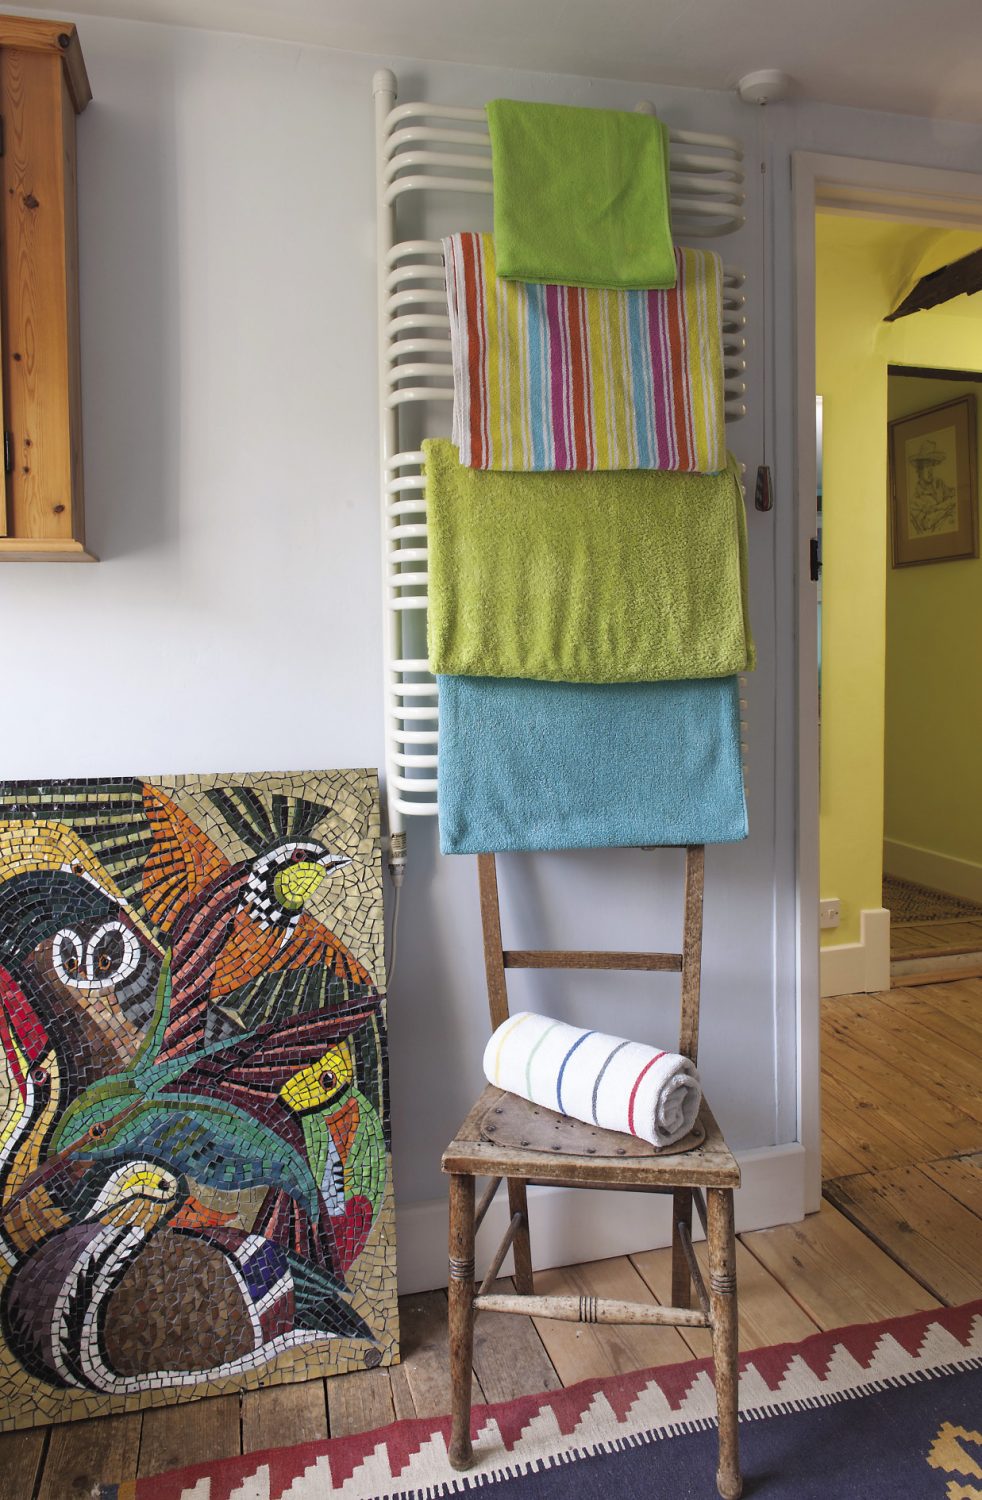 Fiona teaches textile design so she has a great eye for colour, pattern and texture but the couple differ when it comes to their colour preferences. “I really love cooler, watery greens and blues, whereas Oliver loves hot colours, so we argue a bit over those,” says Fiona